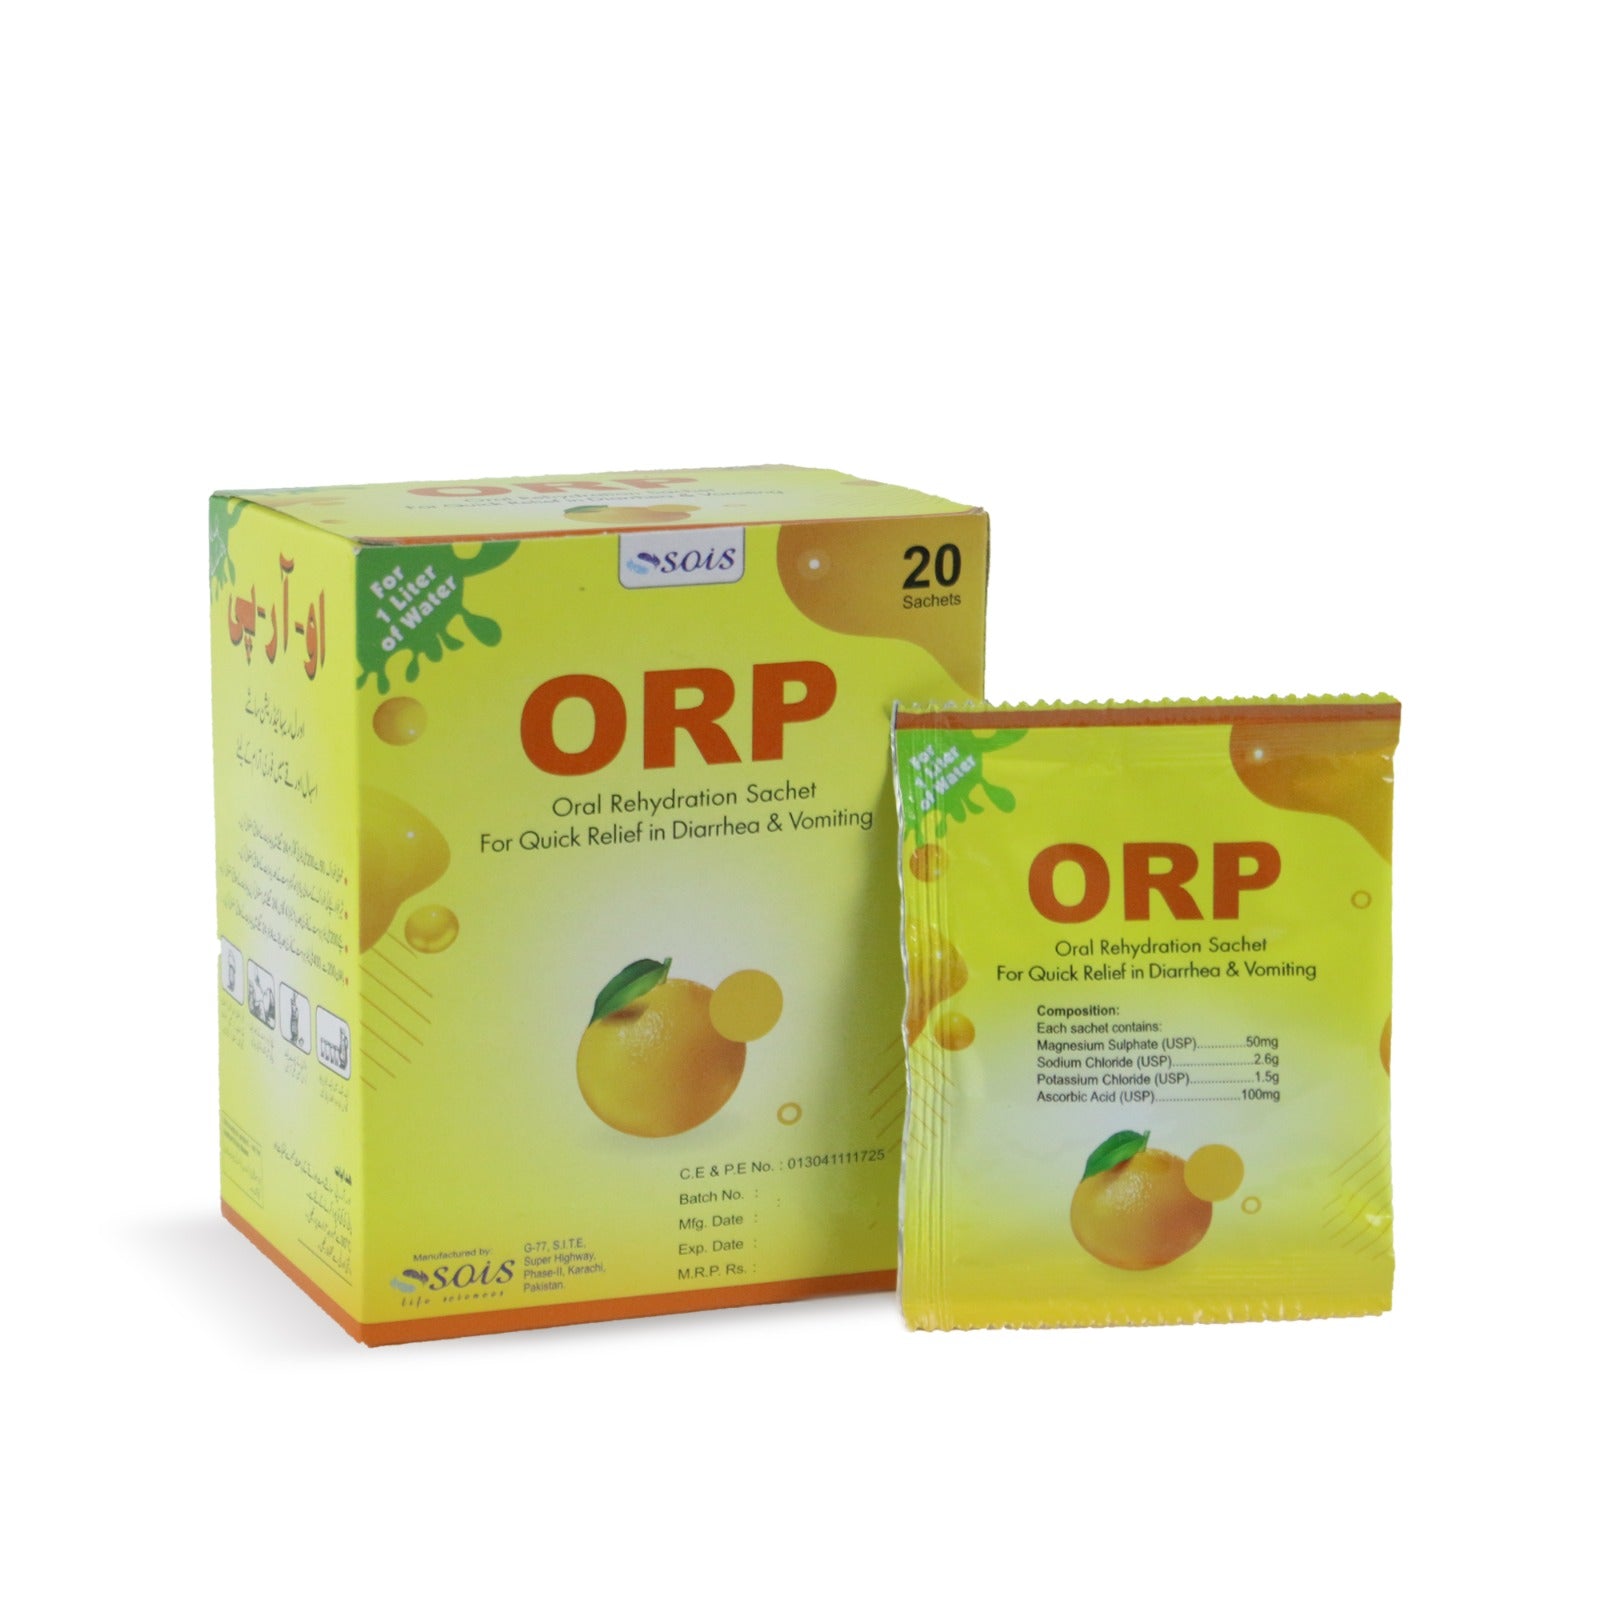 ORP (Oral Rehydration Sachet-ORS)